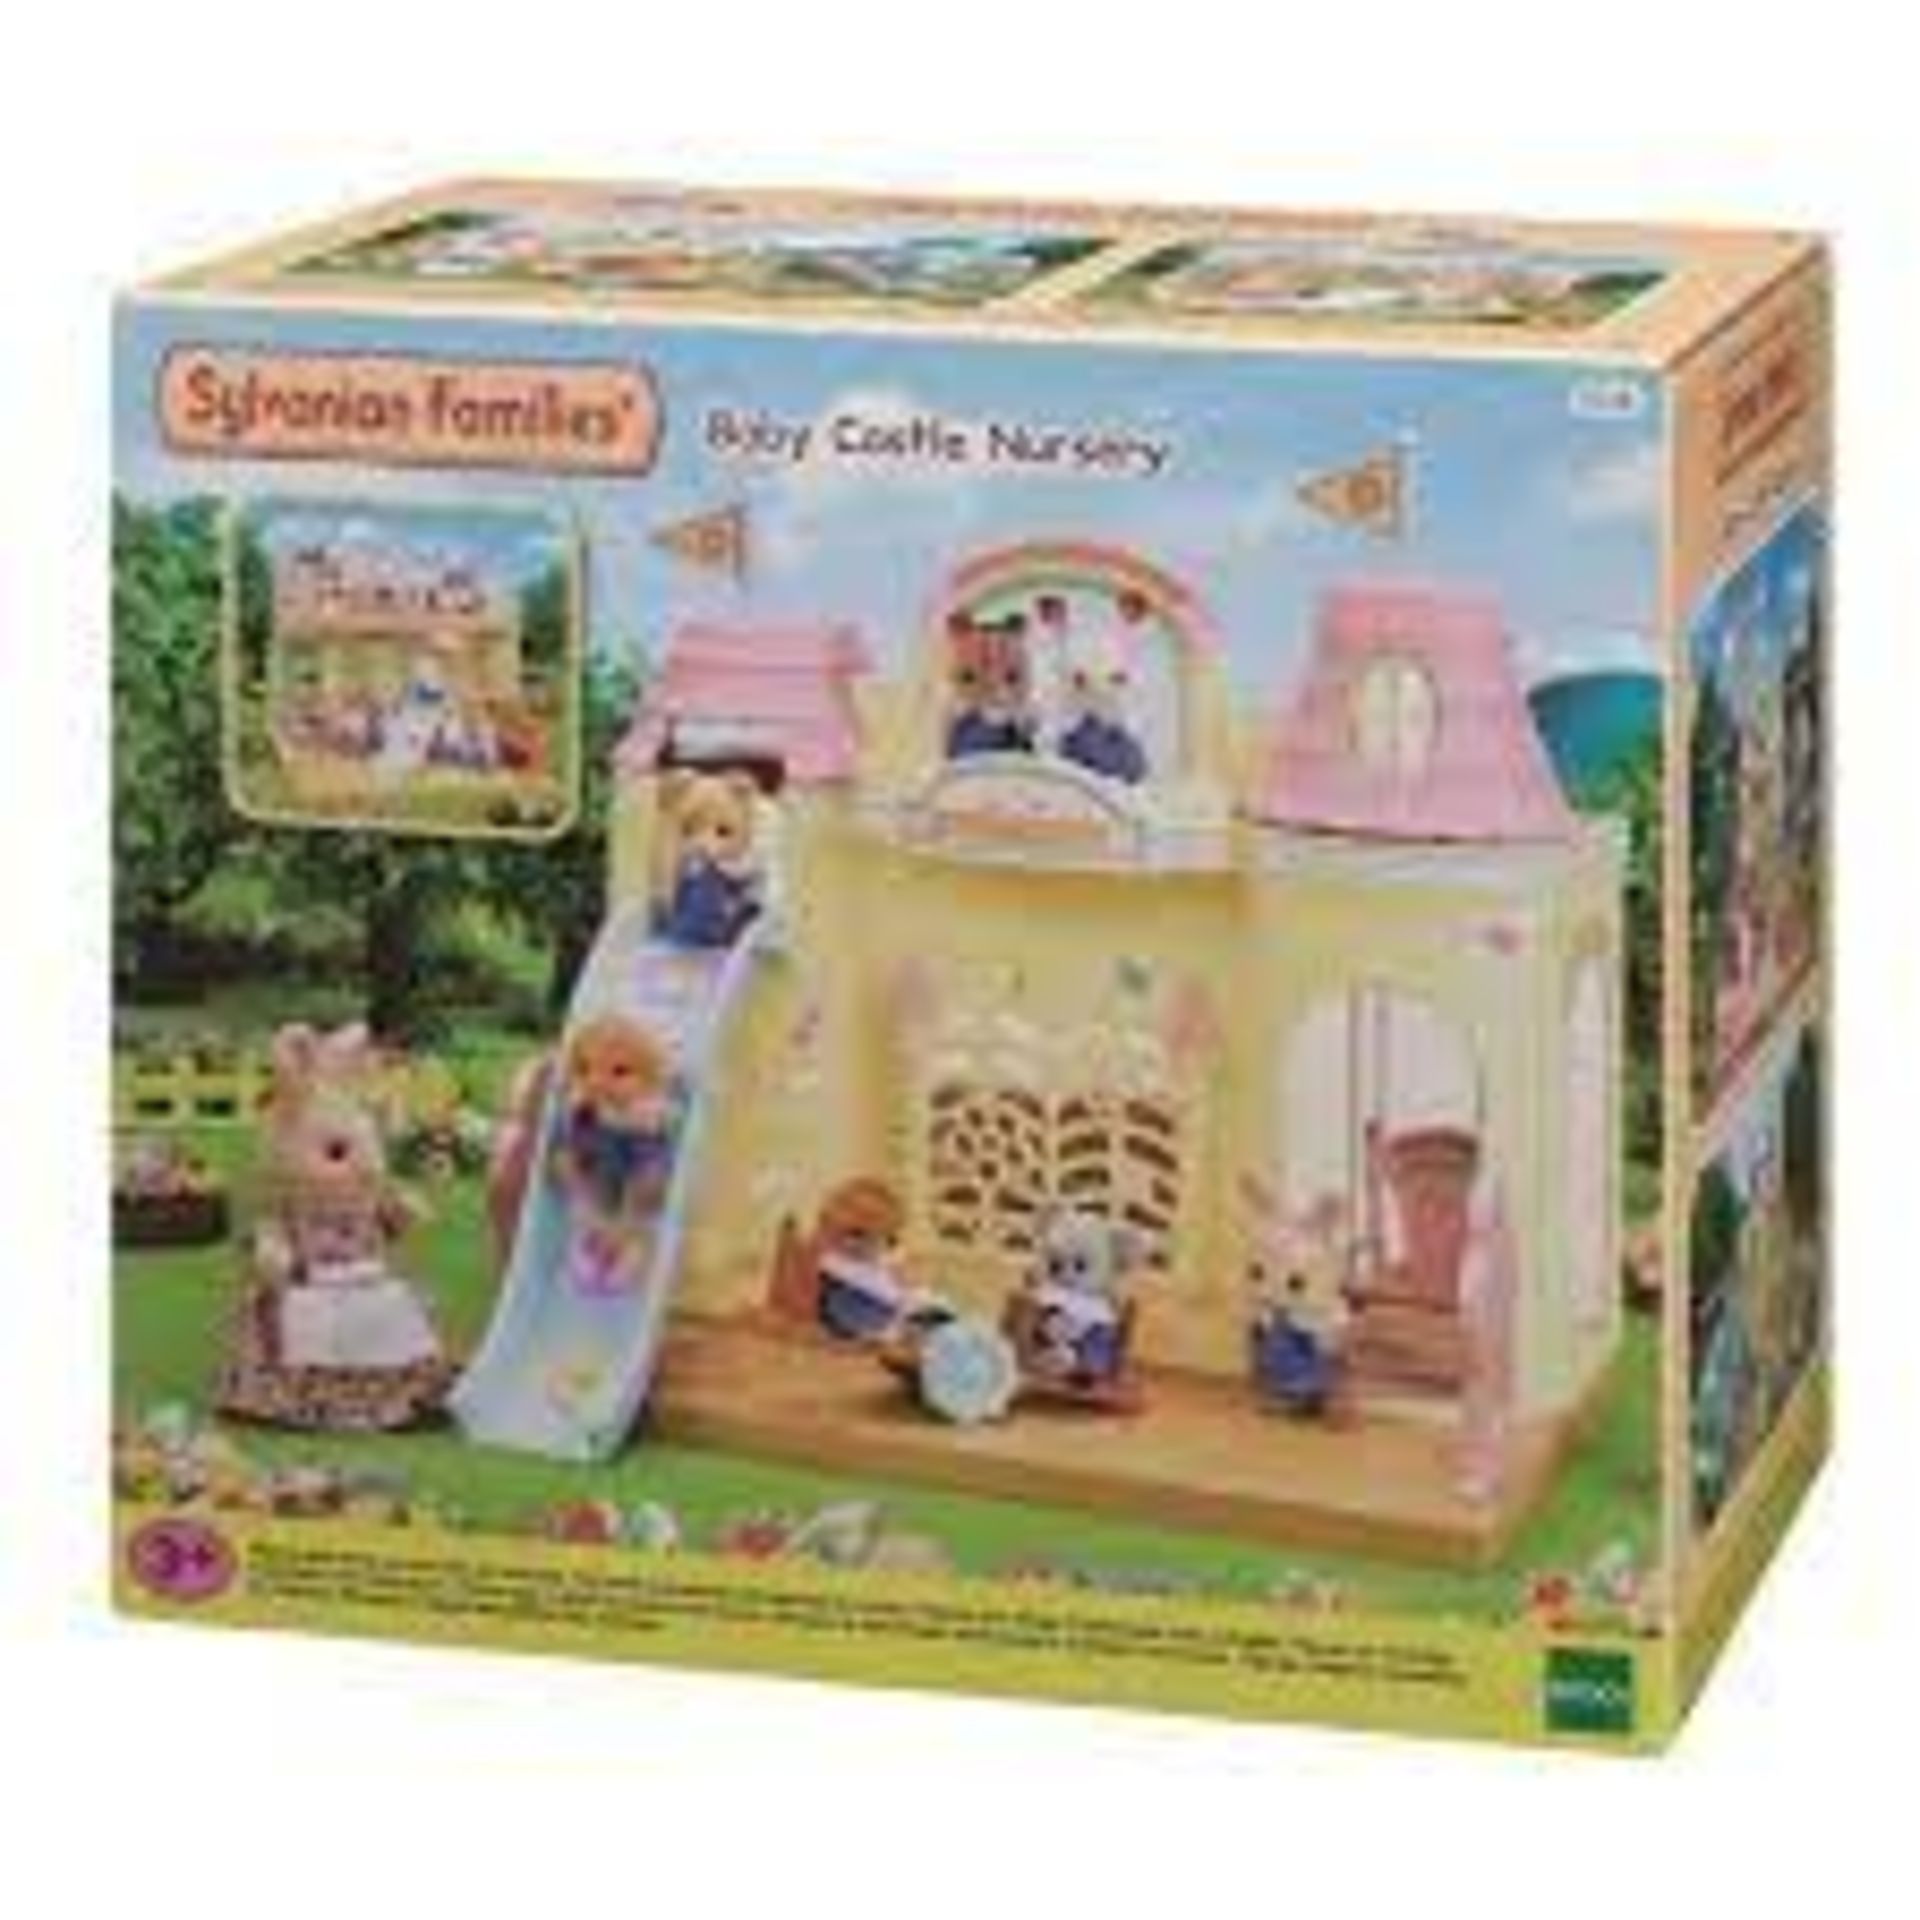 630 X BRAND NEW PIECES OF BRANDED TOYS INCLUDING LOL SURPRISE DOLL SERIES, DESIGN A FRIEND SLEEPOVER - Image 12 of 17